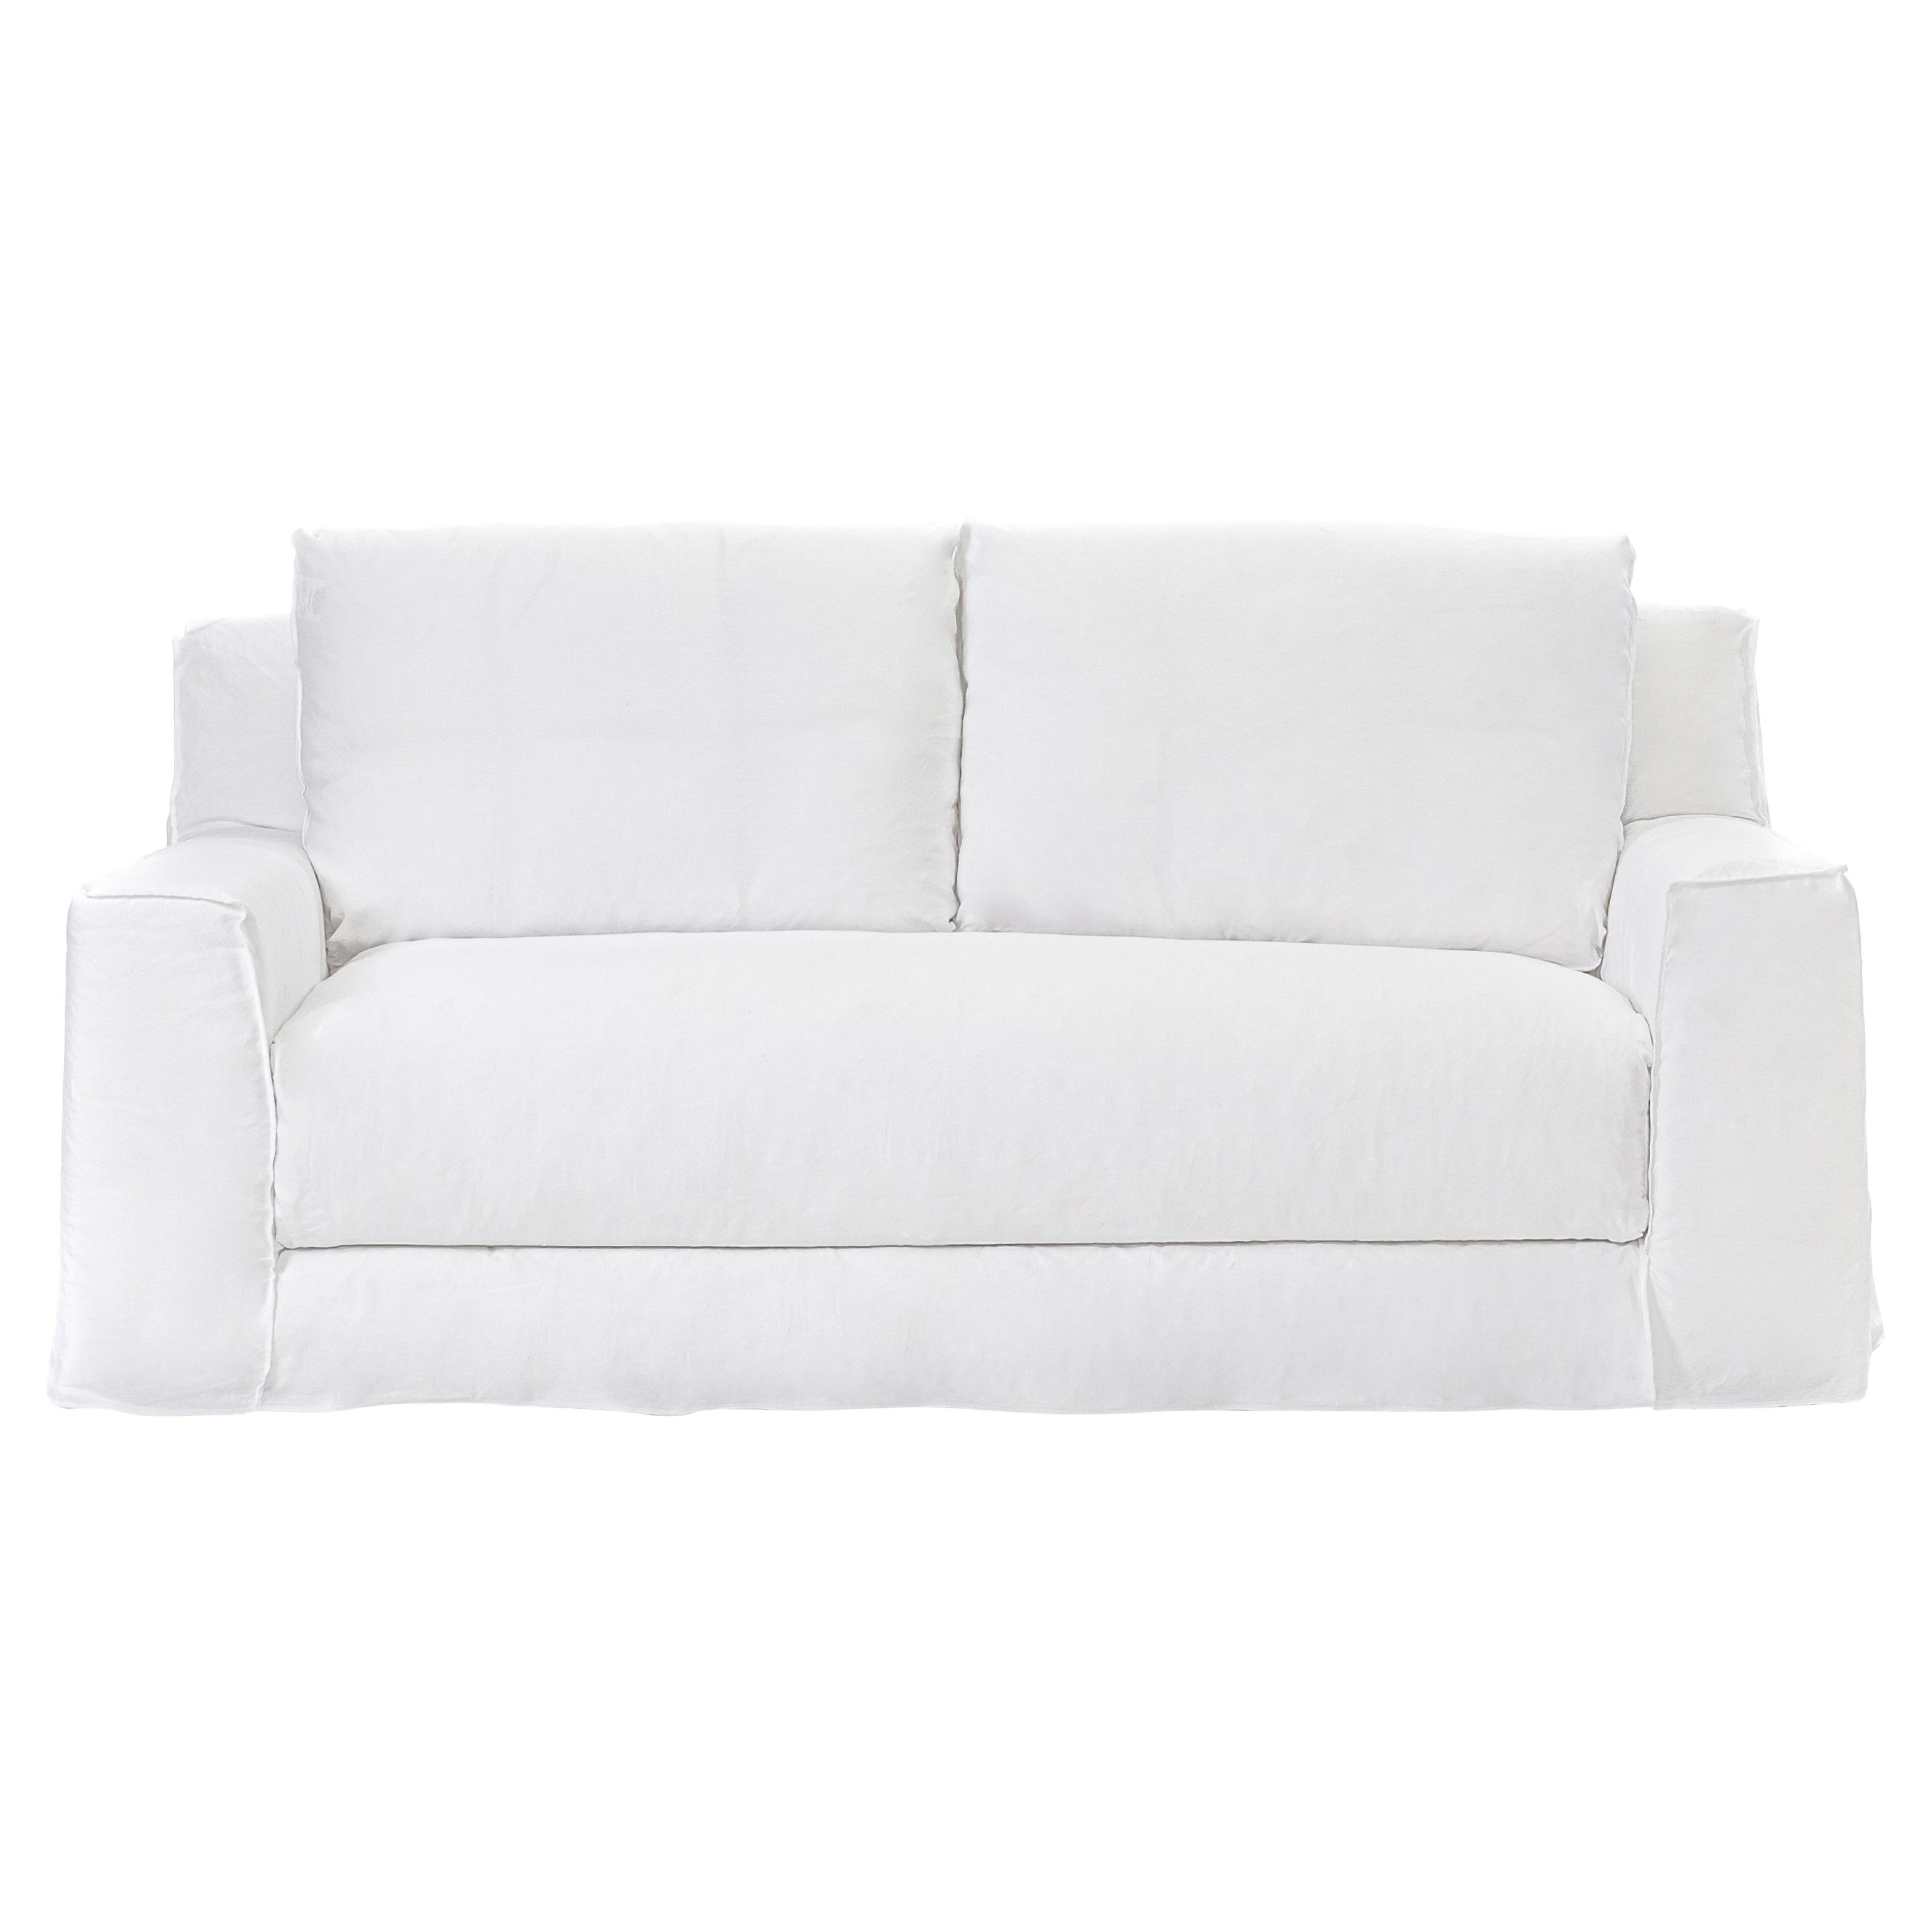 Gervasoni Loll 10 Sofa in White Linen Upholstery by Paola Navone